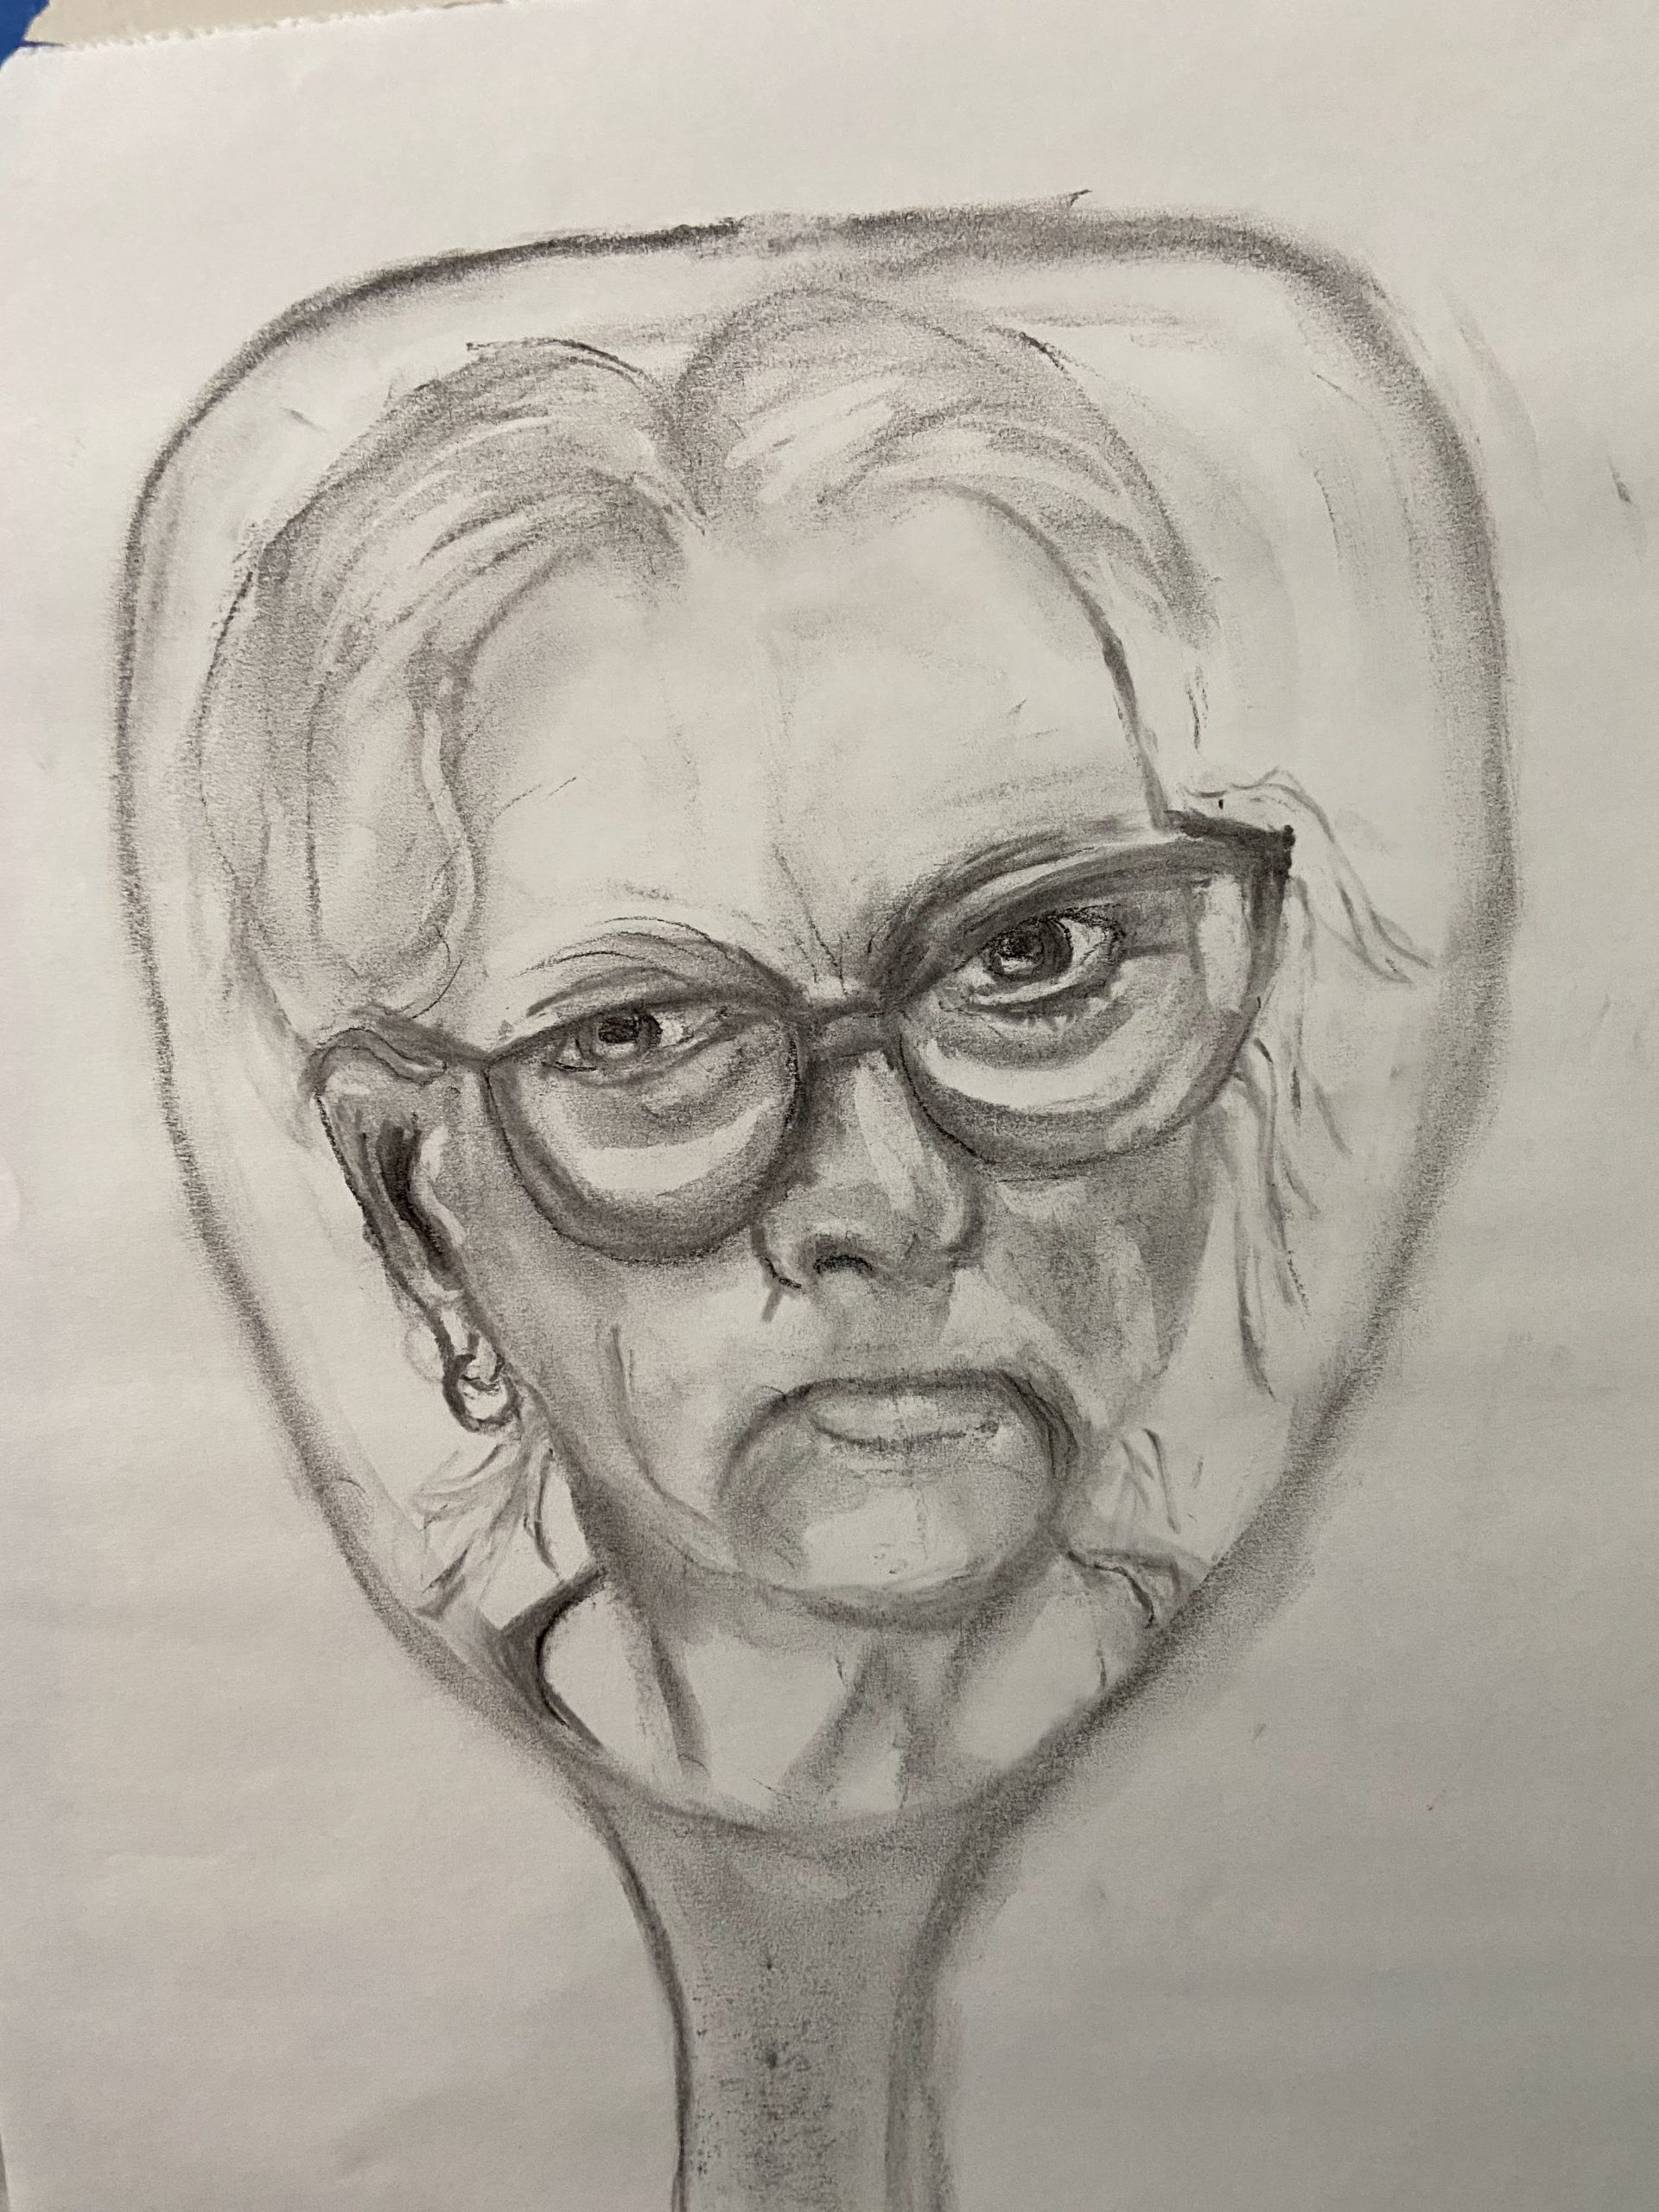 Charcoal drawing of the author's face